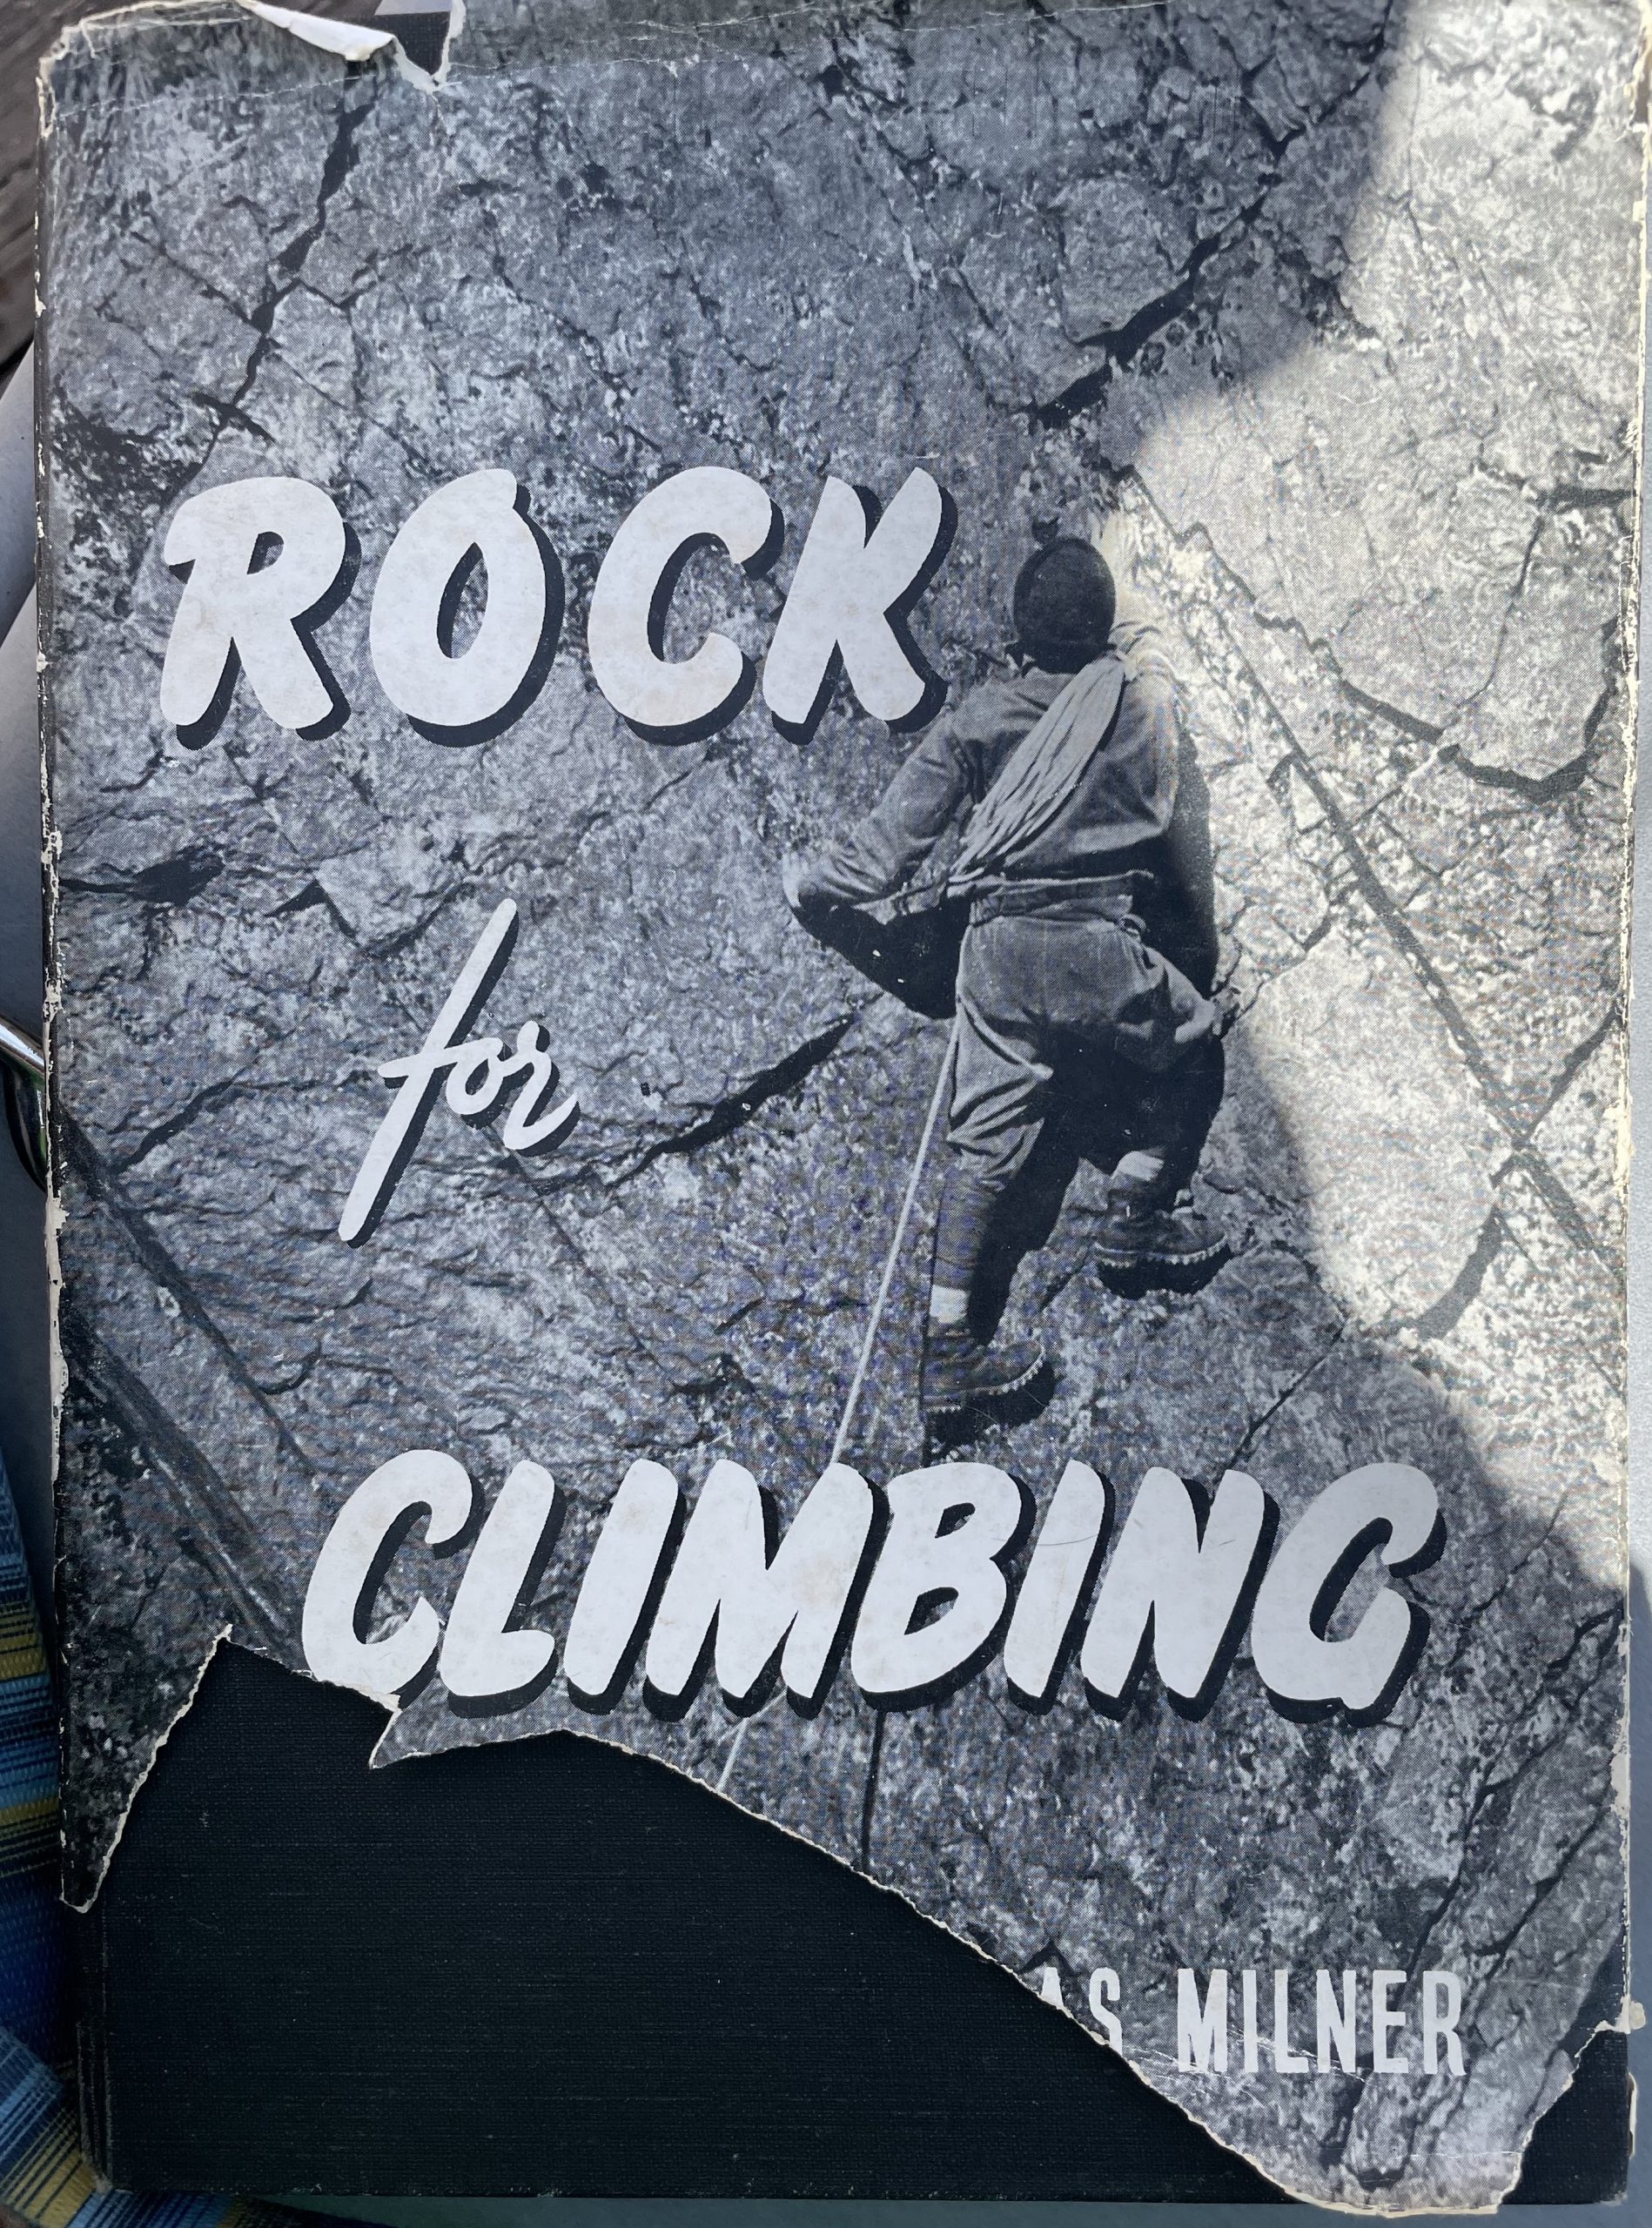 The cover of the Rock for Climbing book, with a torn corner, showing a picture of a person climbing